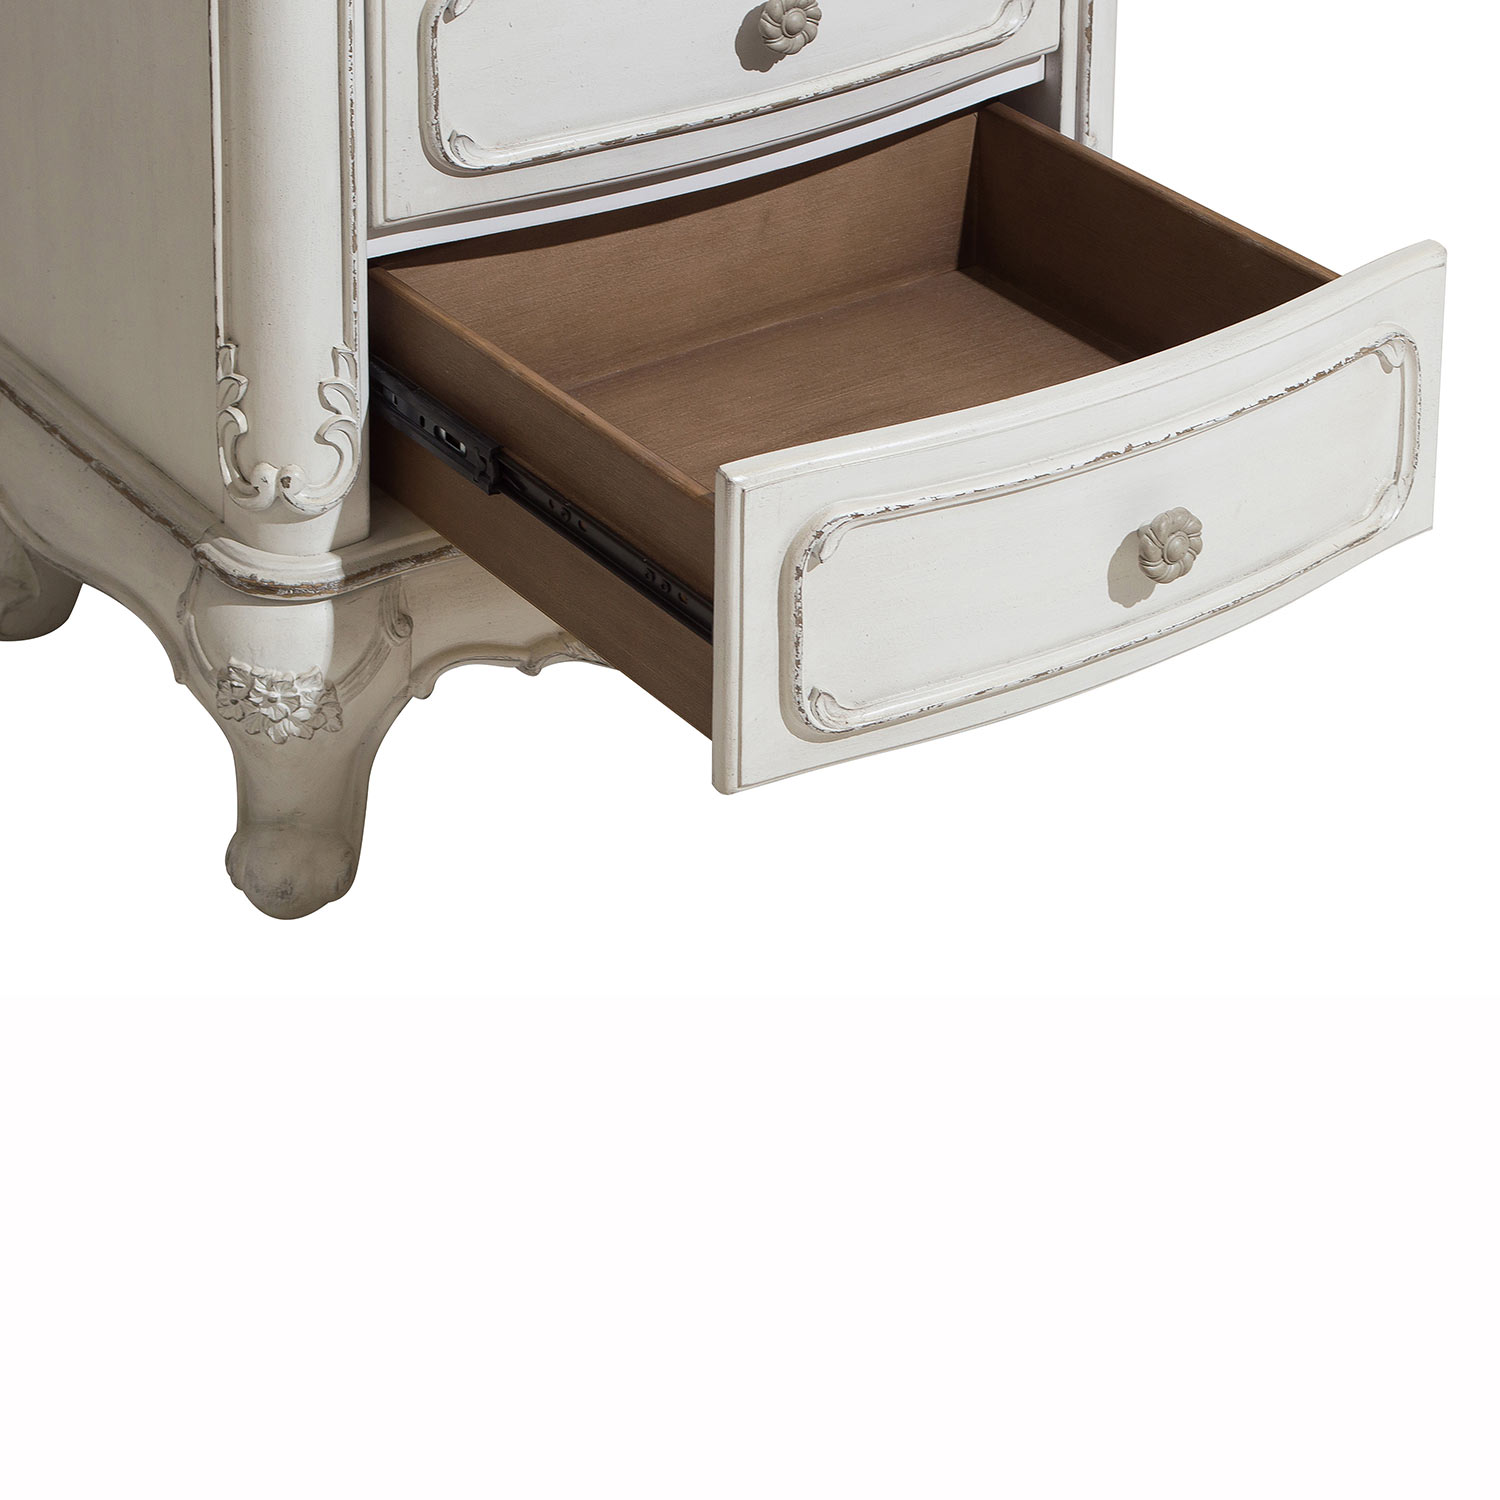 Homelegance Cinderella 7-Drawer Tall Chest - Antique White with Gray Rub-Through